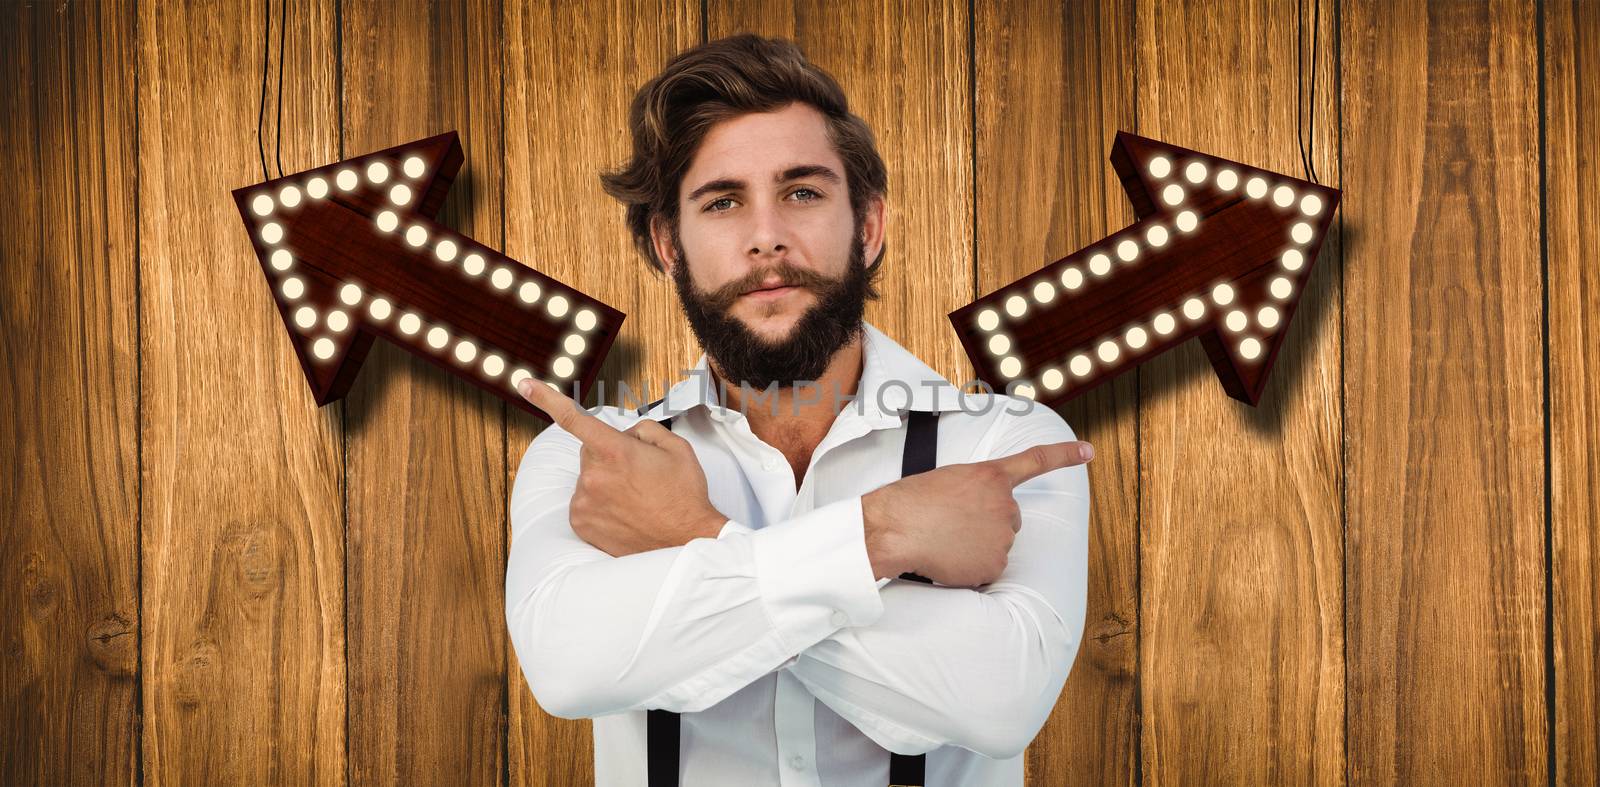 Confident hipster pointing sideways with arms crossed against wooden background